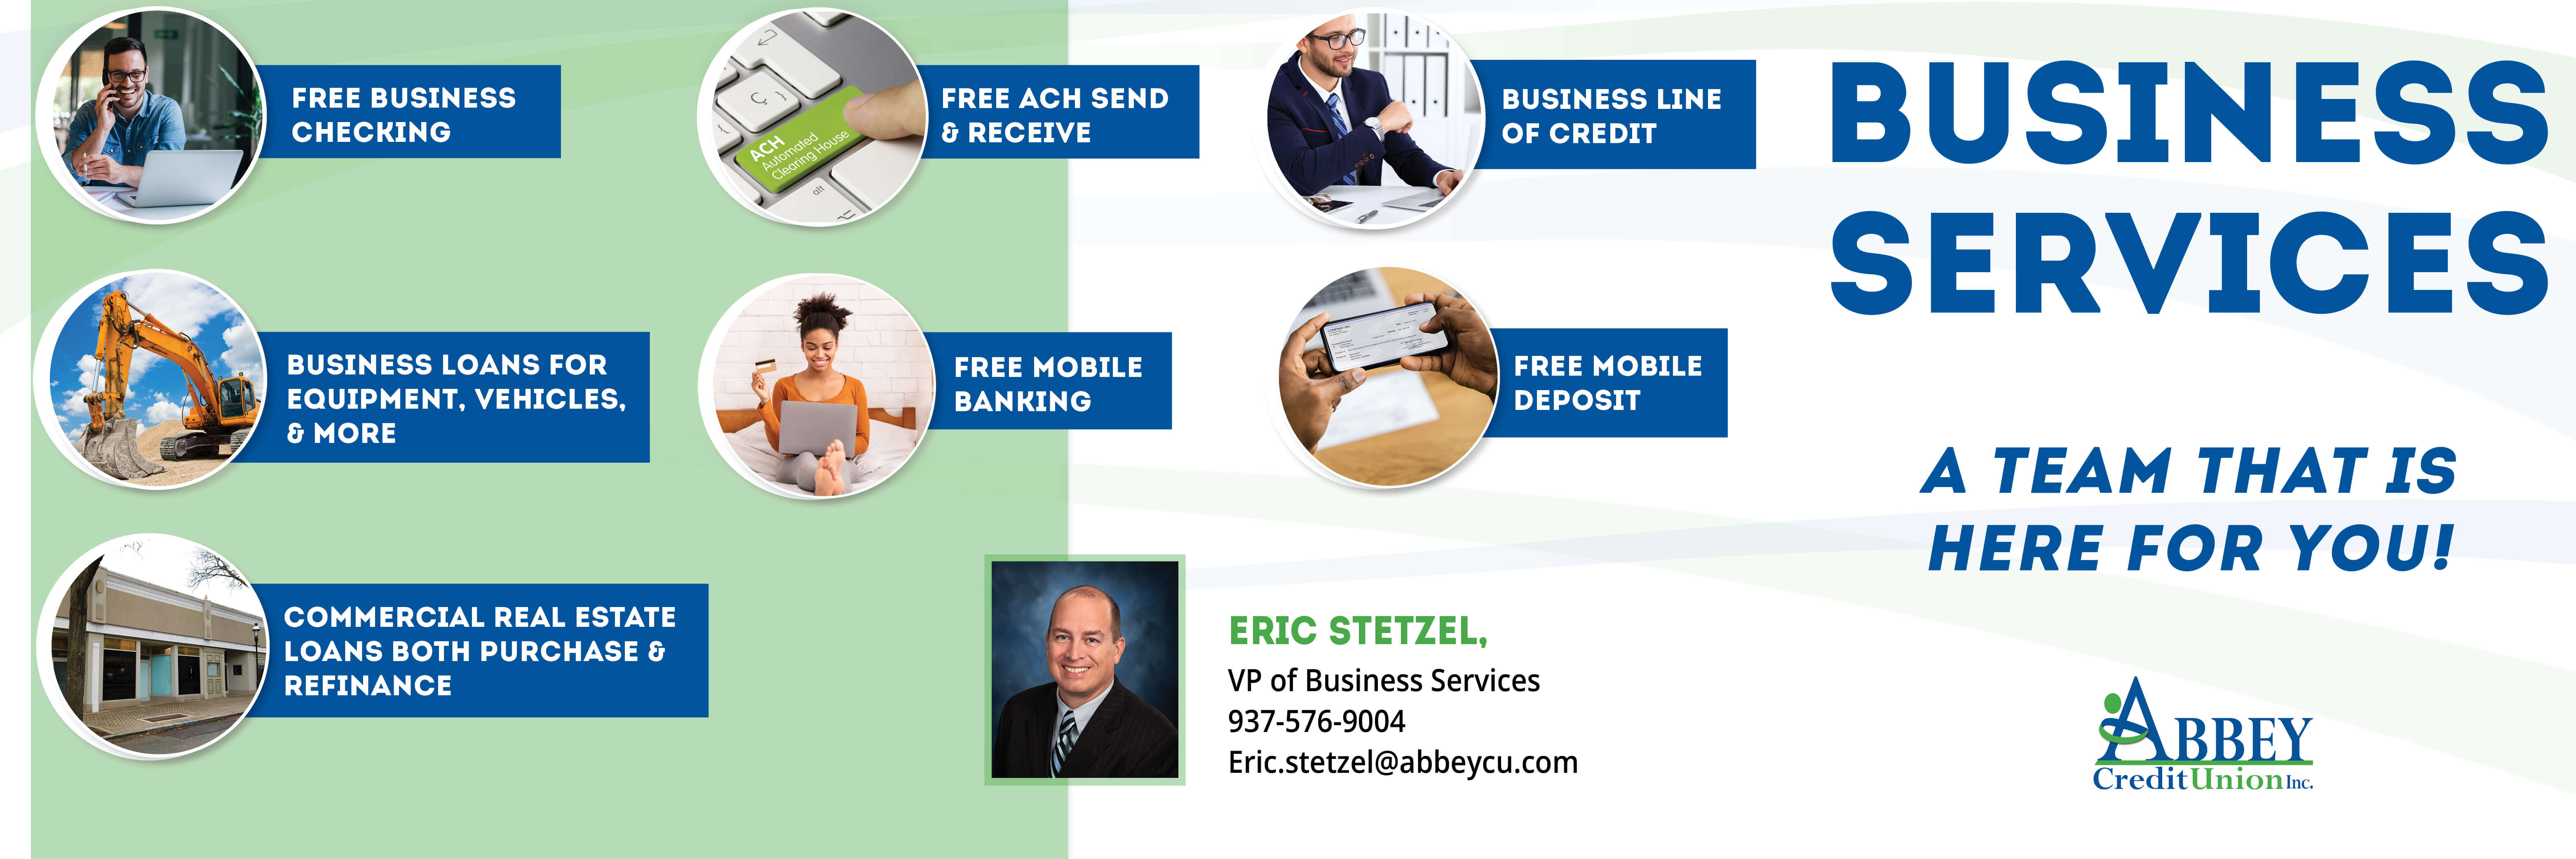 Business Services - A Team That Is Here For You!